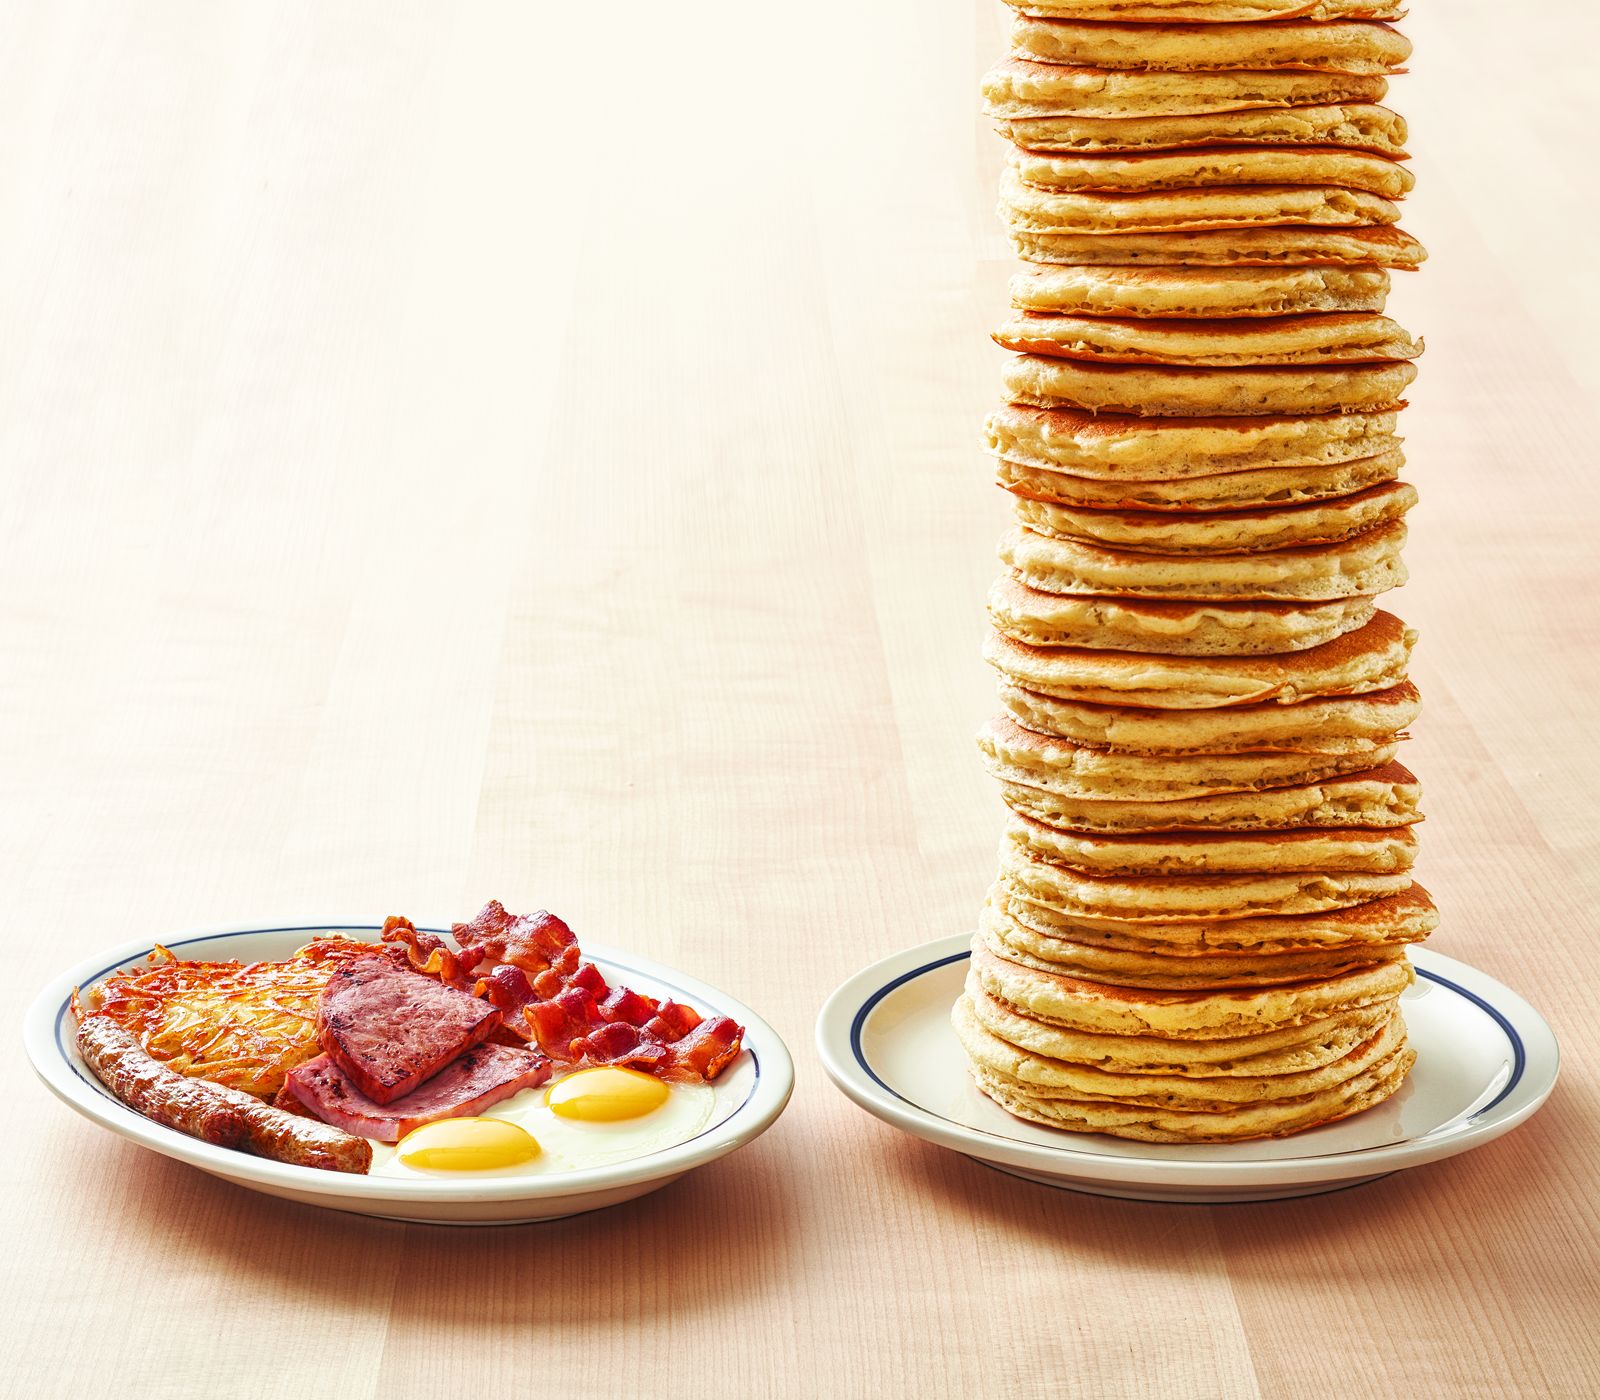 IHOP Brings Back Free "All You Can Eat Pancakes" with the Purchase of Any Breakfast Combo*